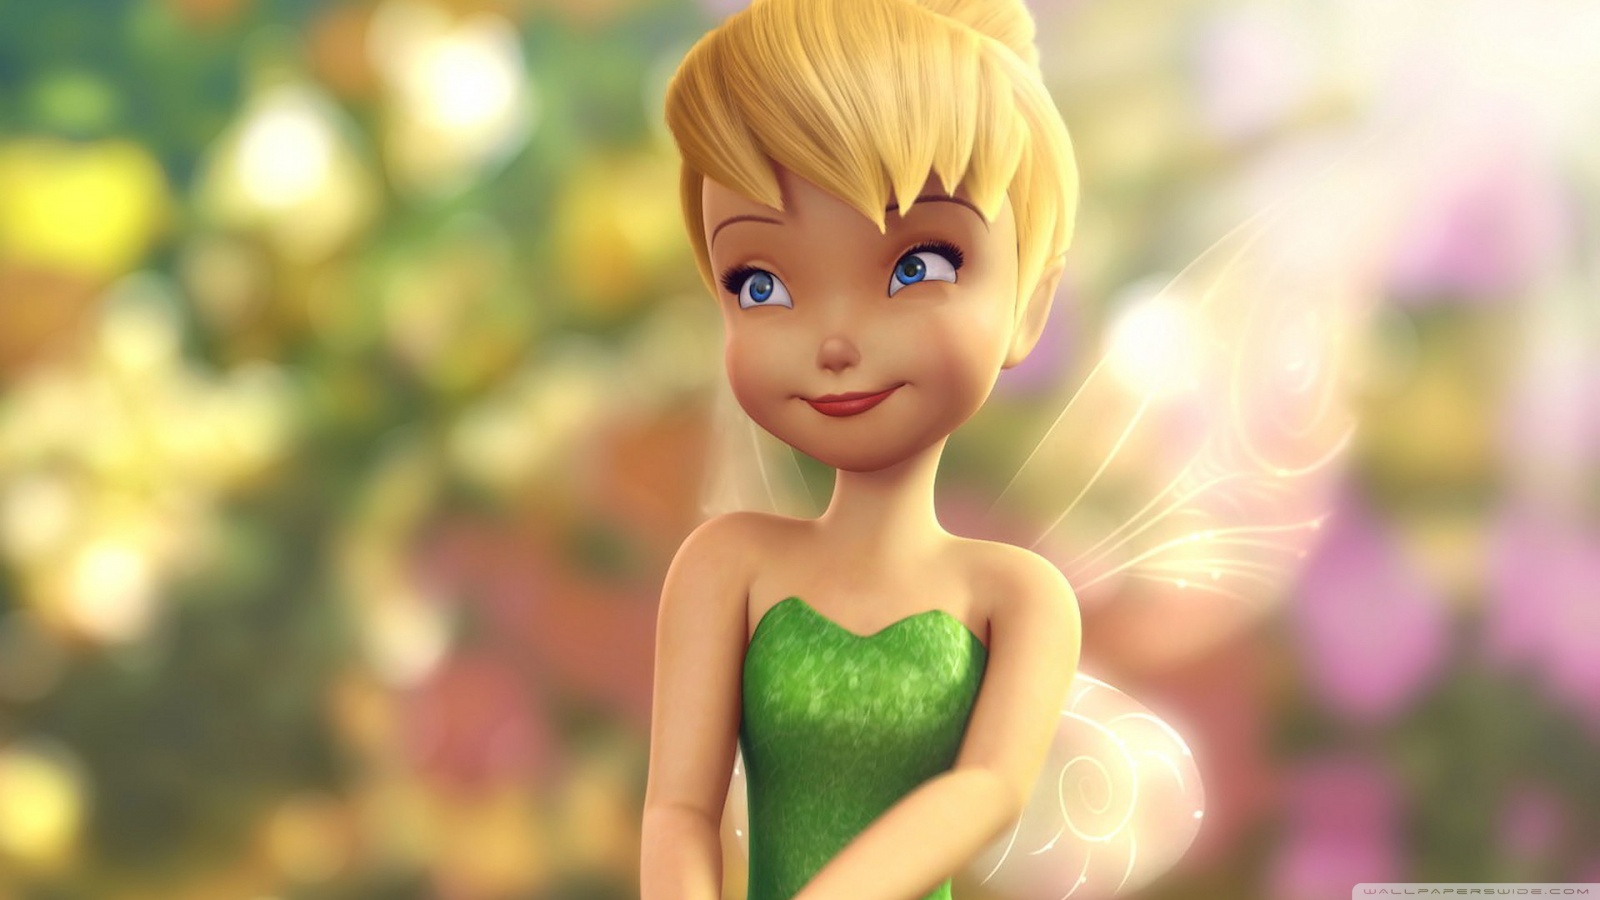 The Tinker Bell Confessions